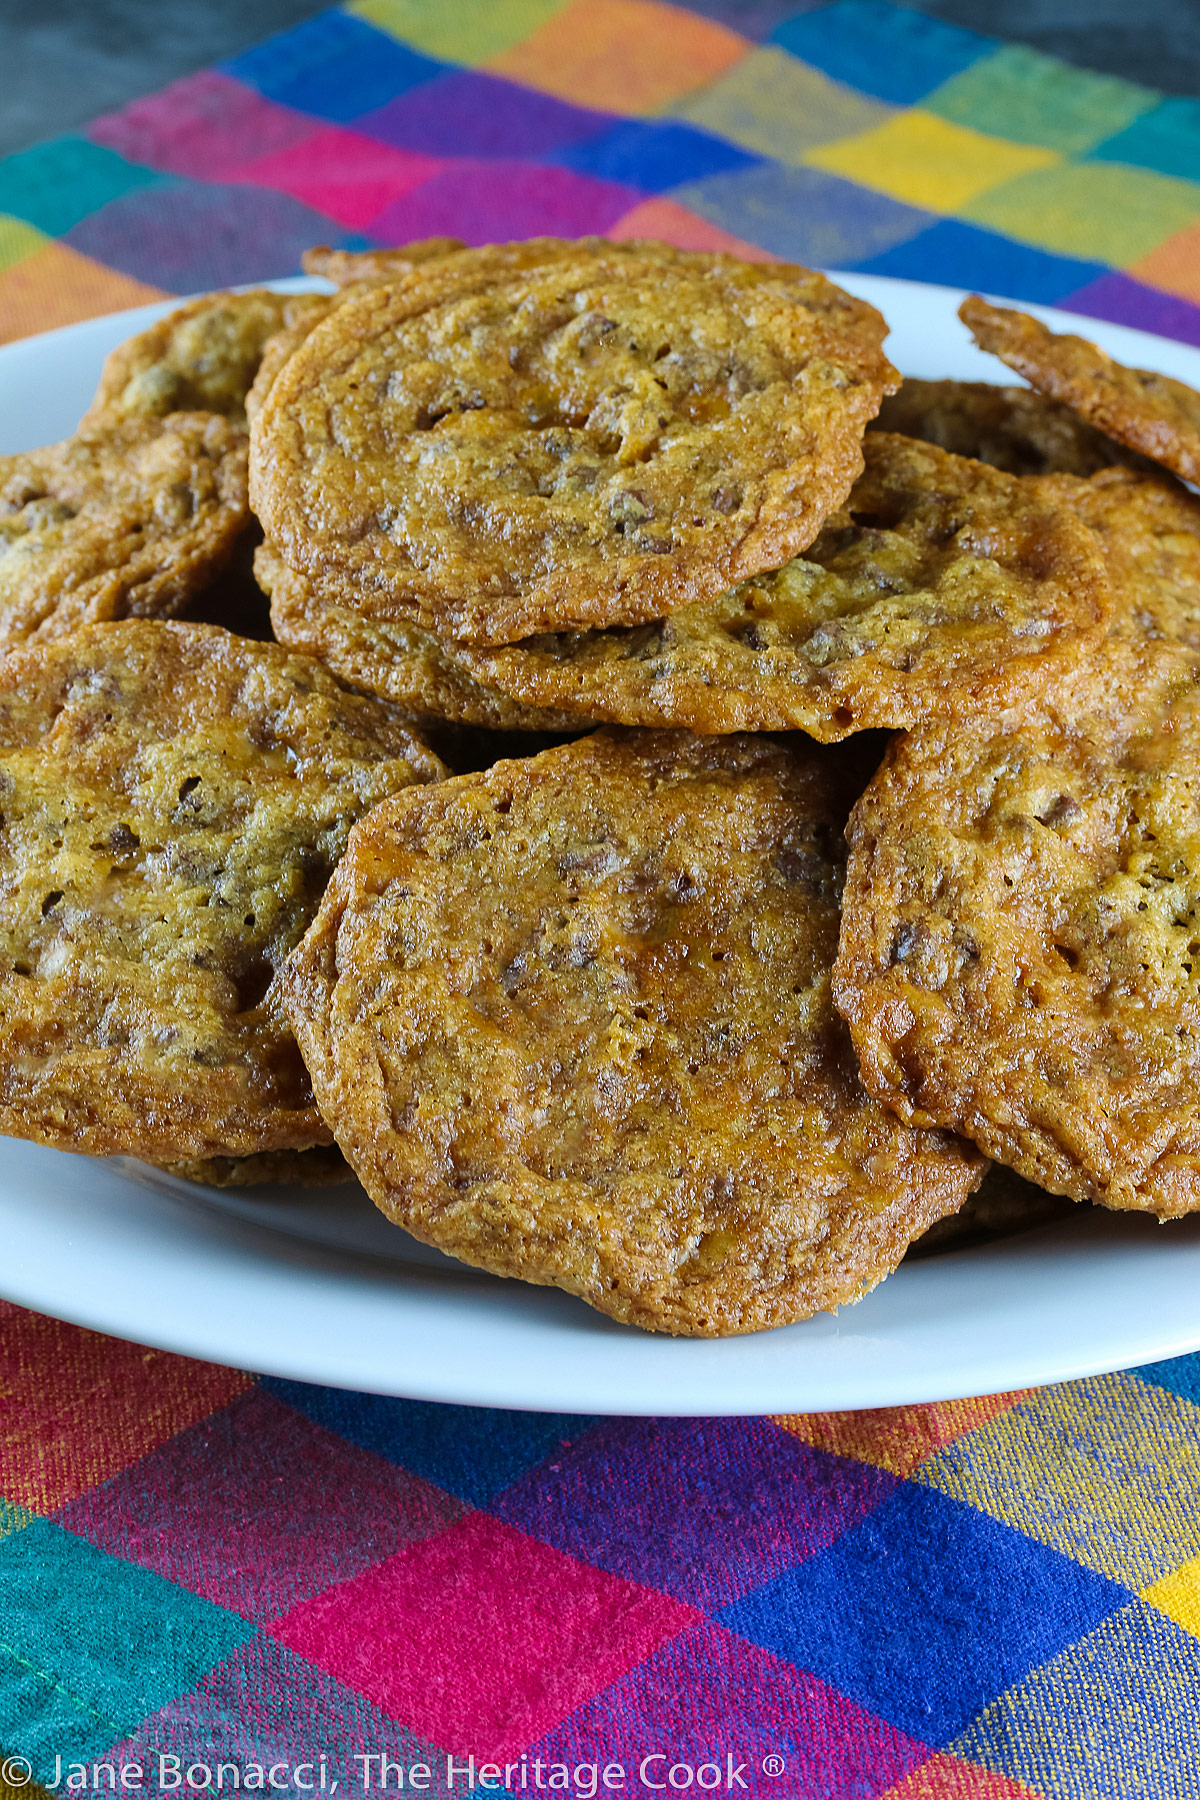 Pile of baked cookies on a white plate with a brightly colored plaid cloth underneath. Easy Toffee Chocolate Chip Cookies (Gluten Free) © 2022 Jane Bonacci, The Heritage Cook. 